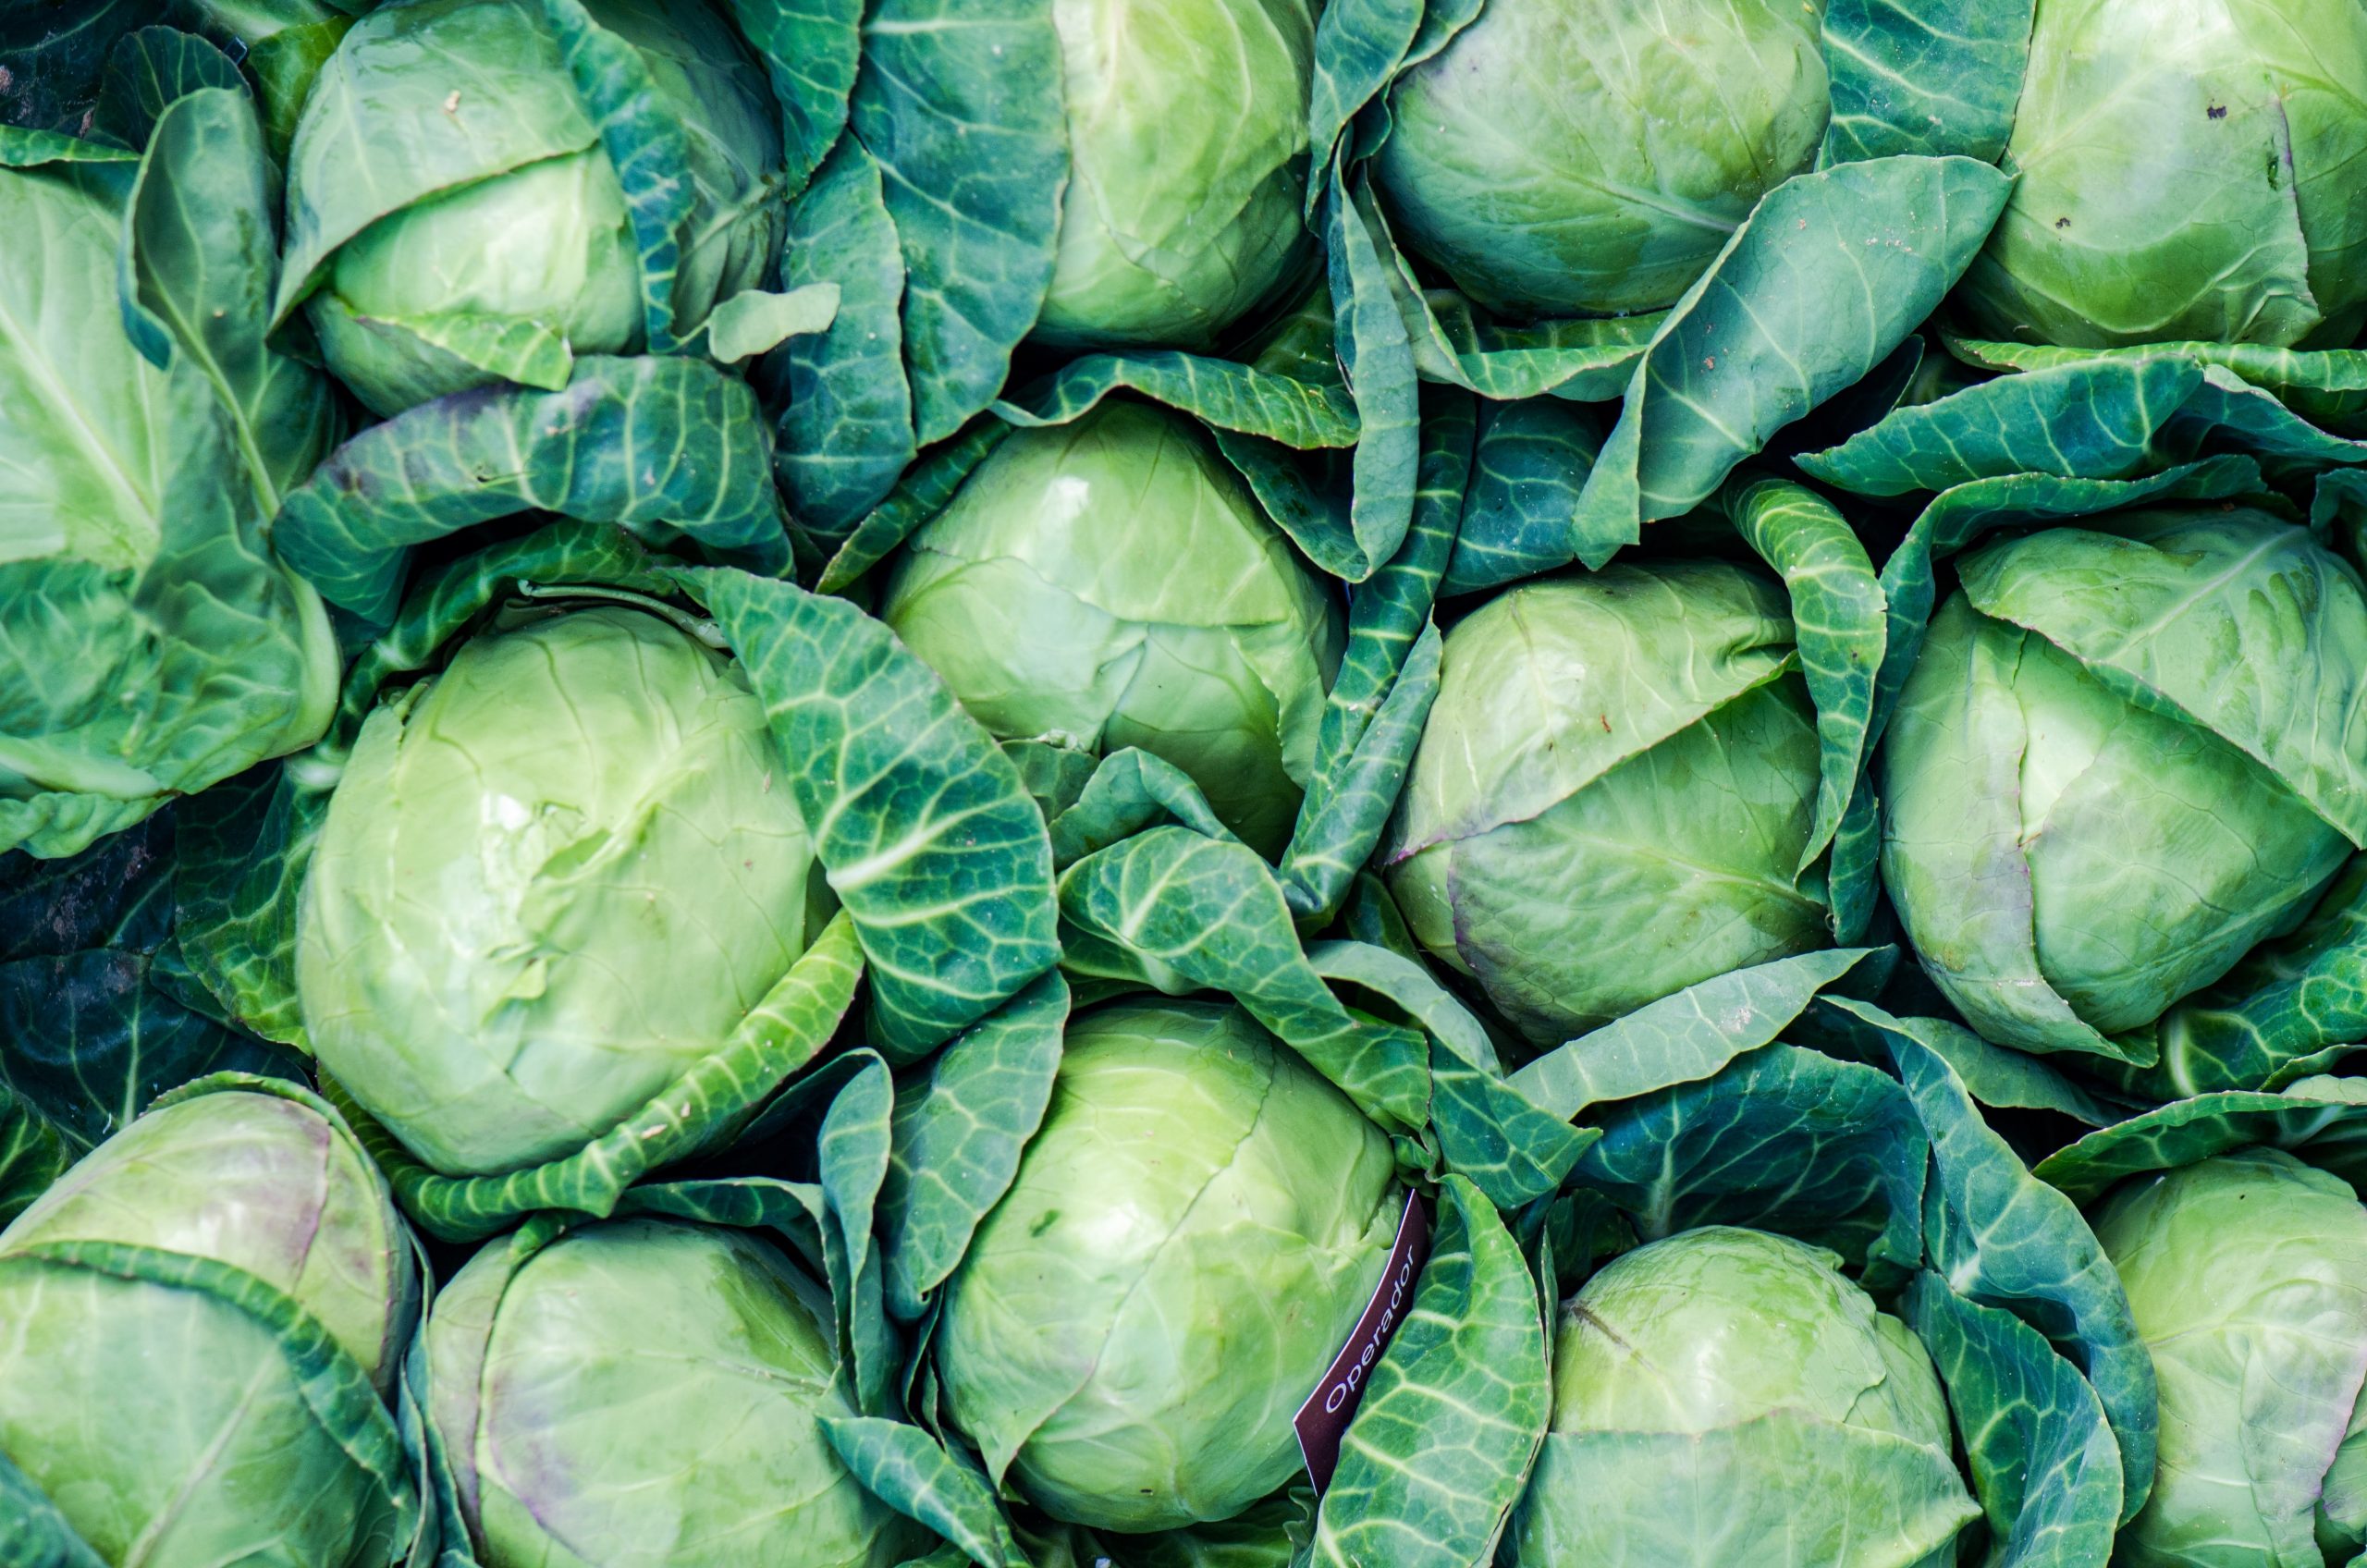 What Types of Cabbage are There?